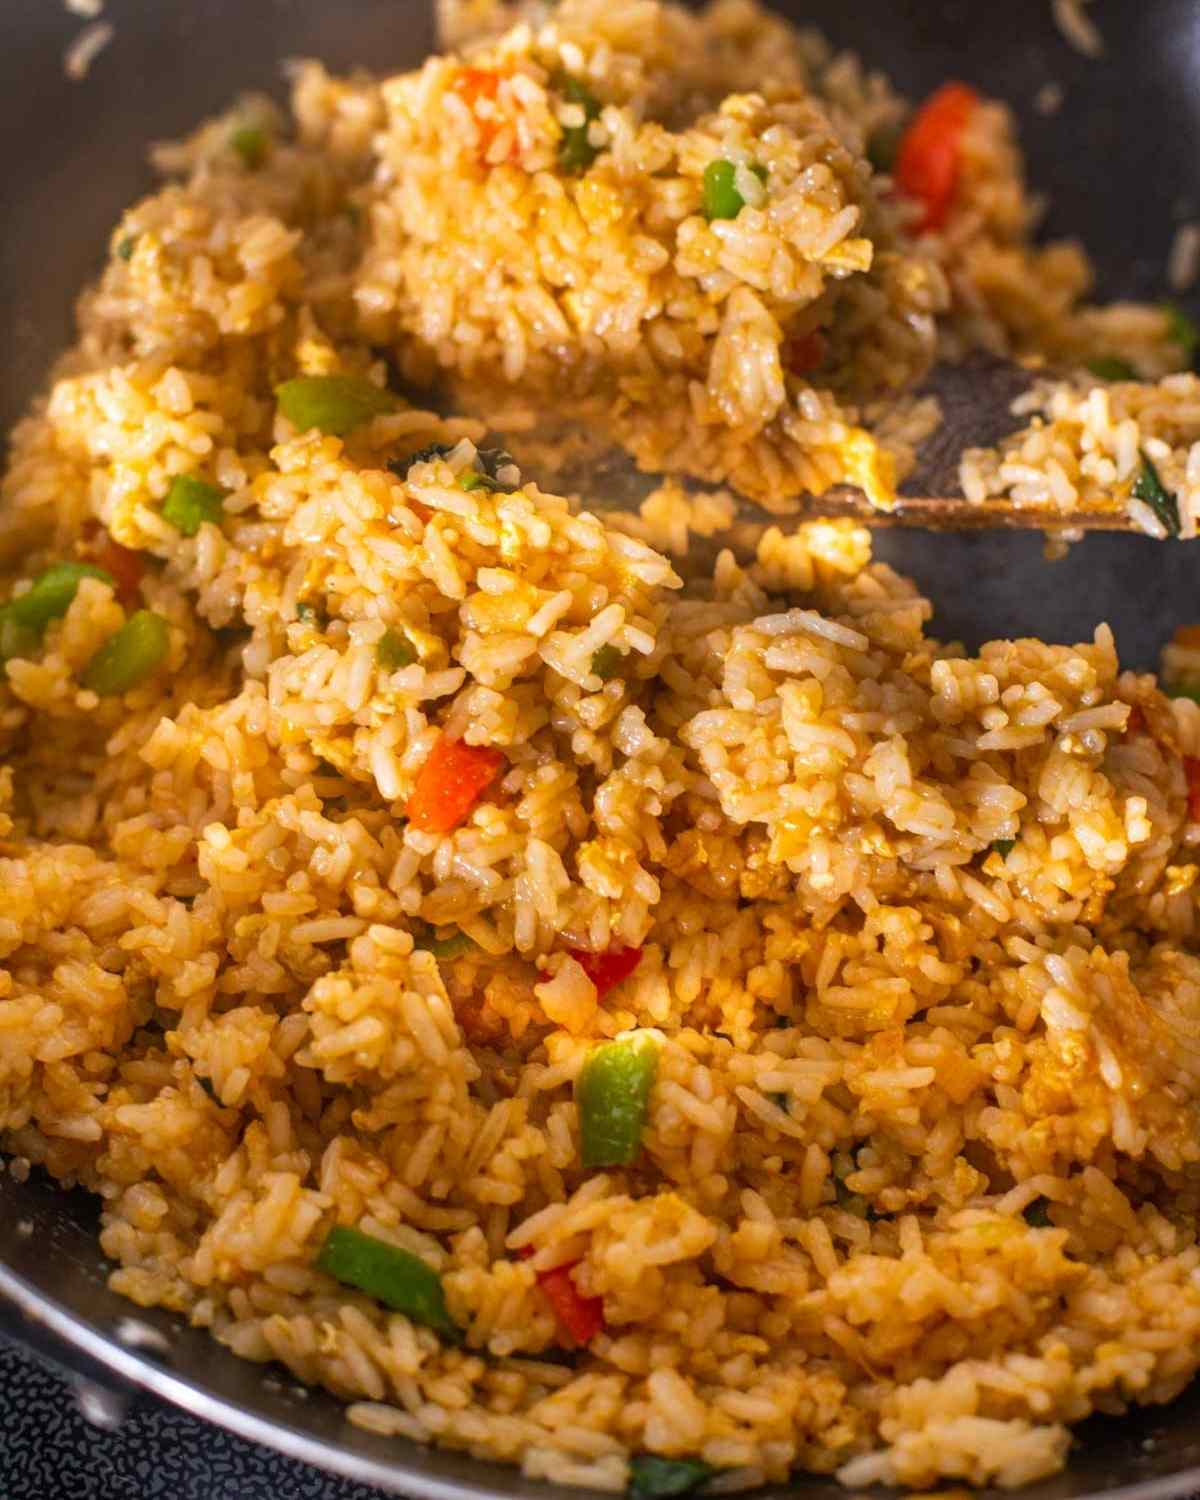 Fried rice being tossed in sauces in a wok